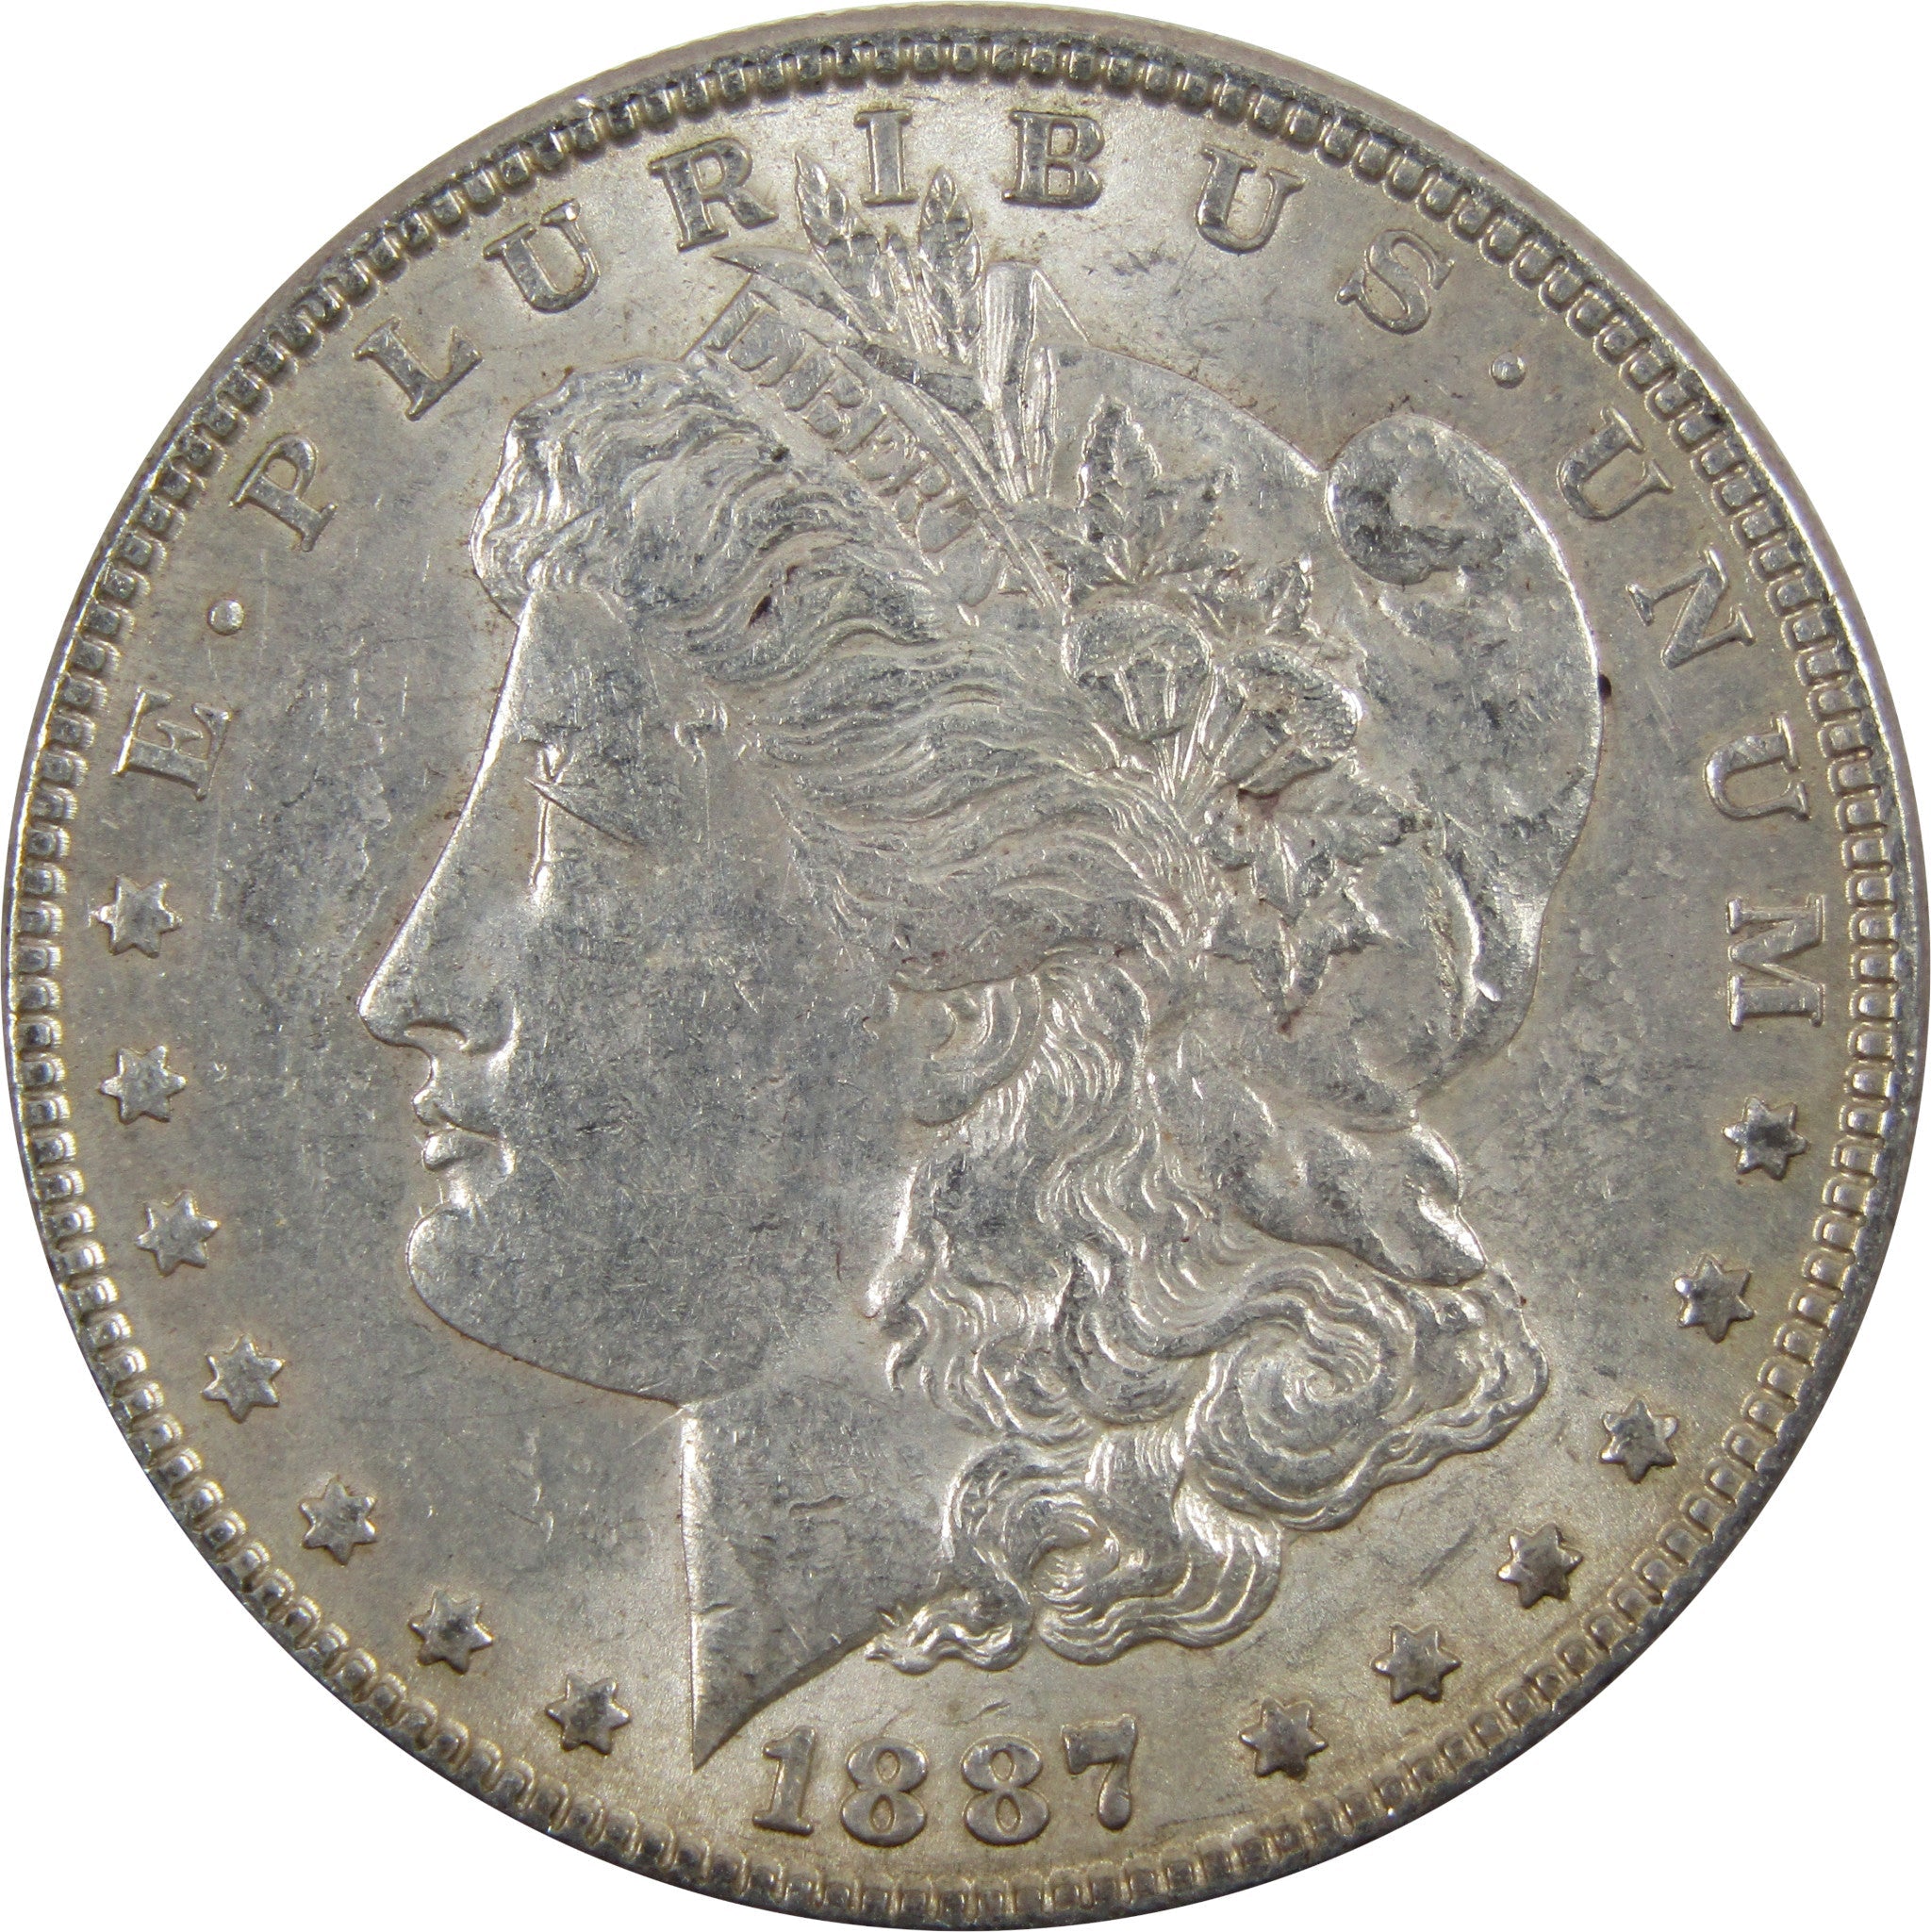 1887 Morgan Dollar AU About Uncirculated 90% Silver $1 Coin SKU:I5468 - Morgan coin - Morgan silver dollar - Morgan silver dollar for sale - Profile Coins &amp; Collectibles